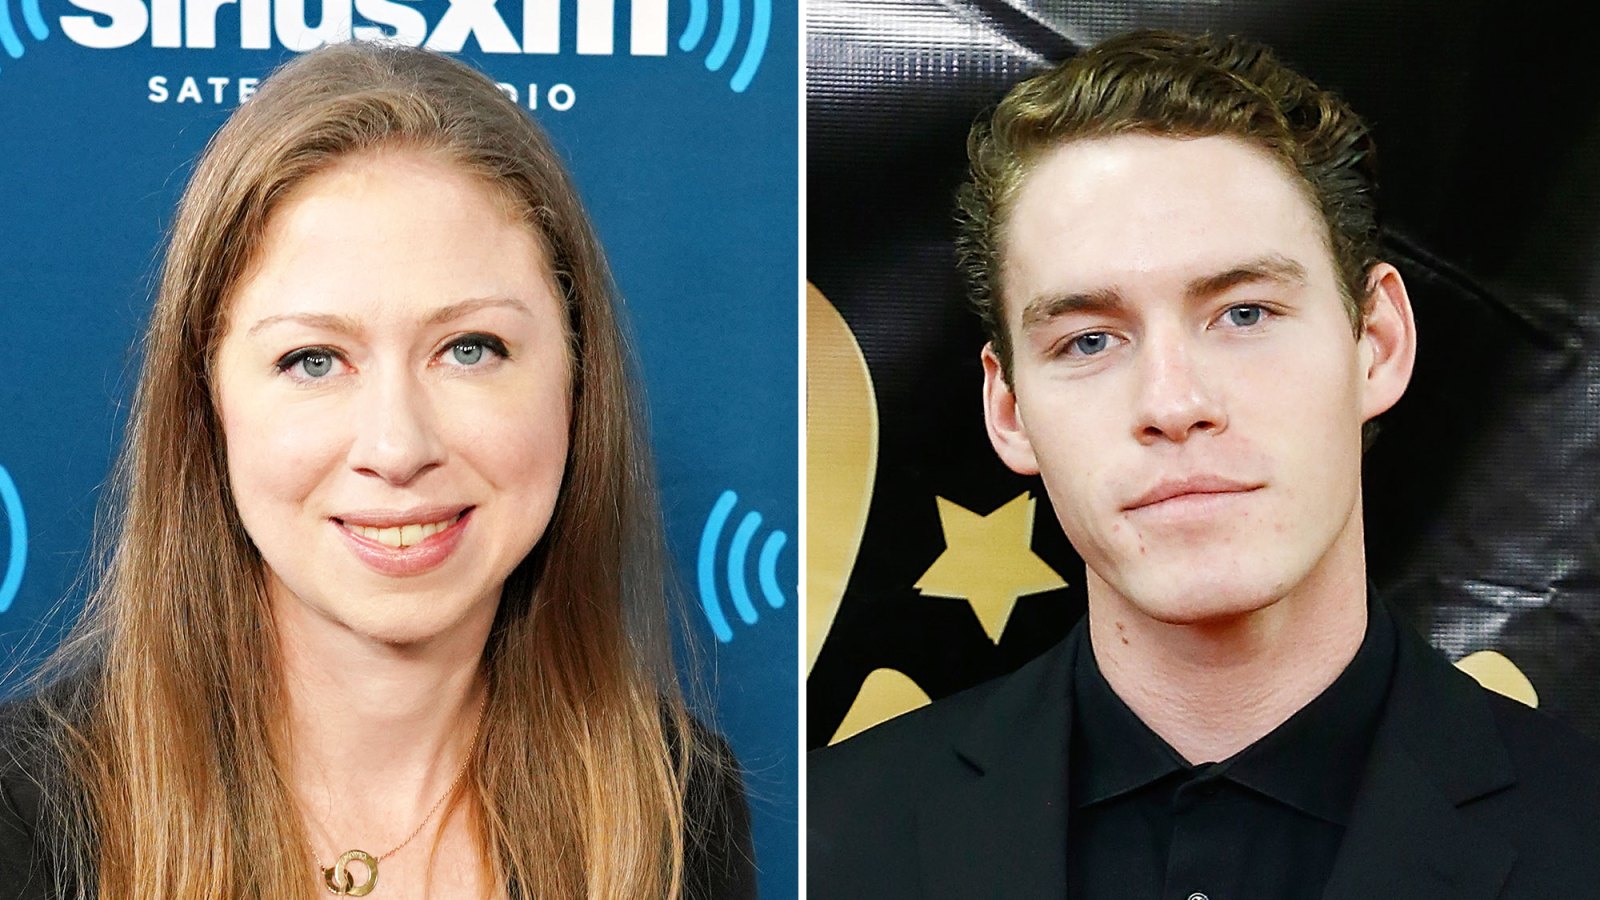 Chelsea Clinton Gushes Over Her Hot Cousin Tyler Clinton’s Modeling Success